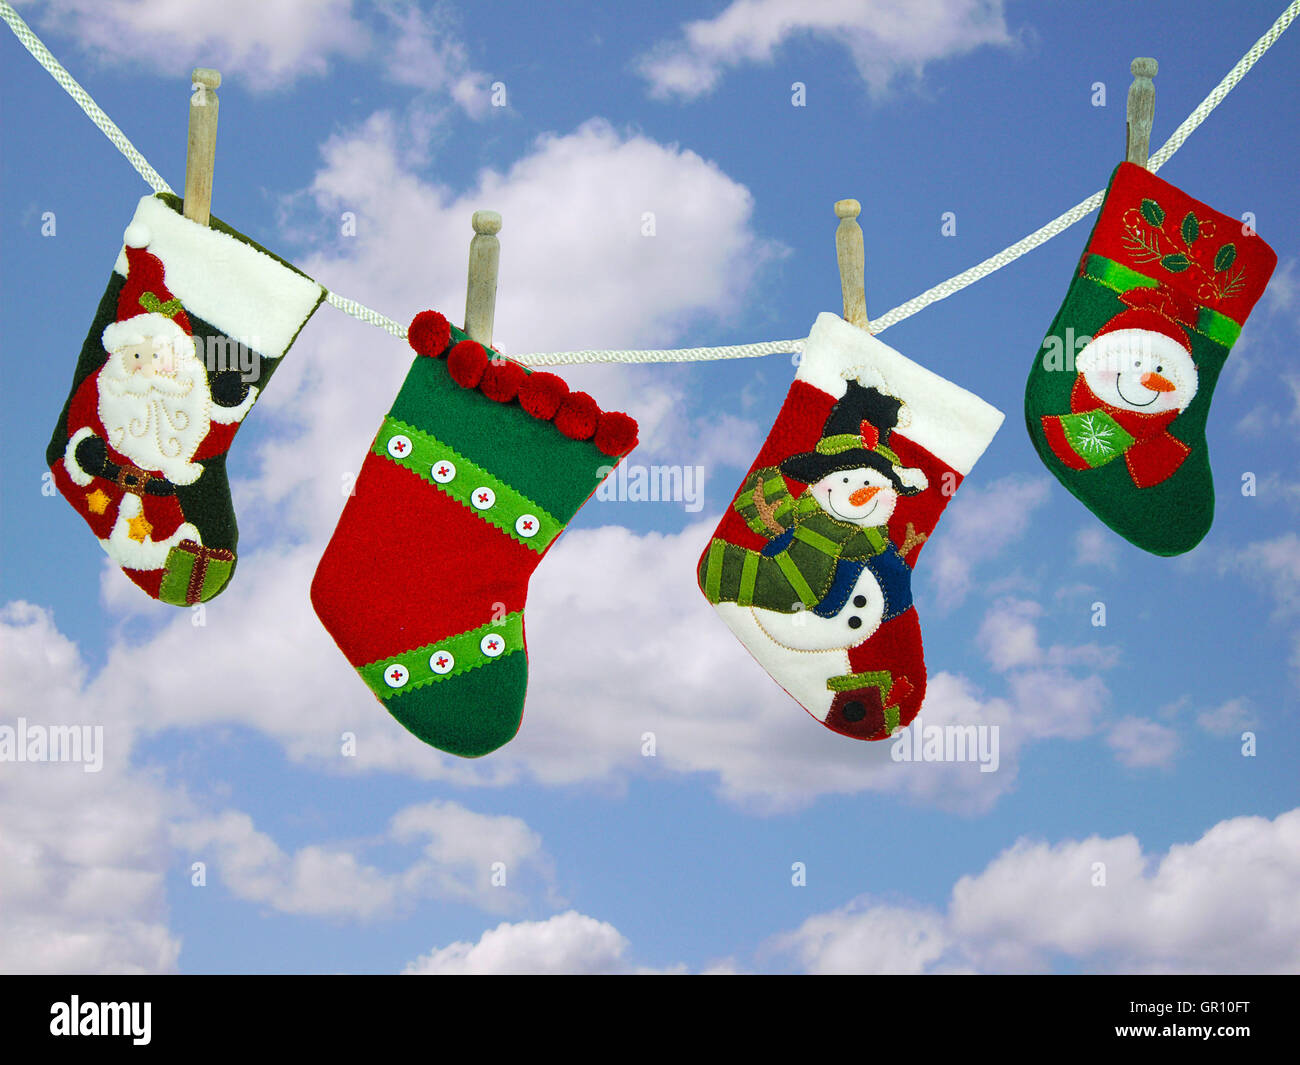 Christmas stocking hanging on clothesline with sky background Stock Photo